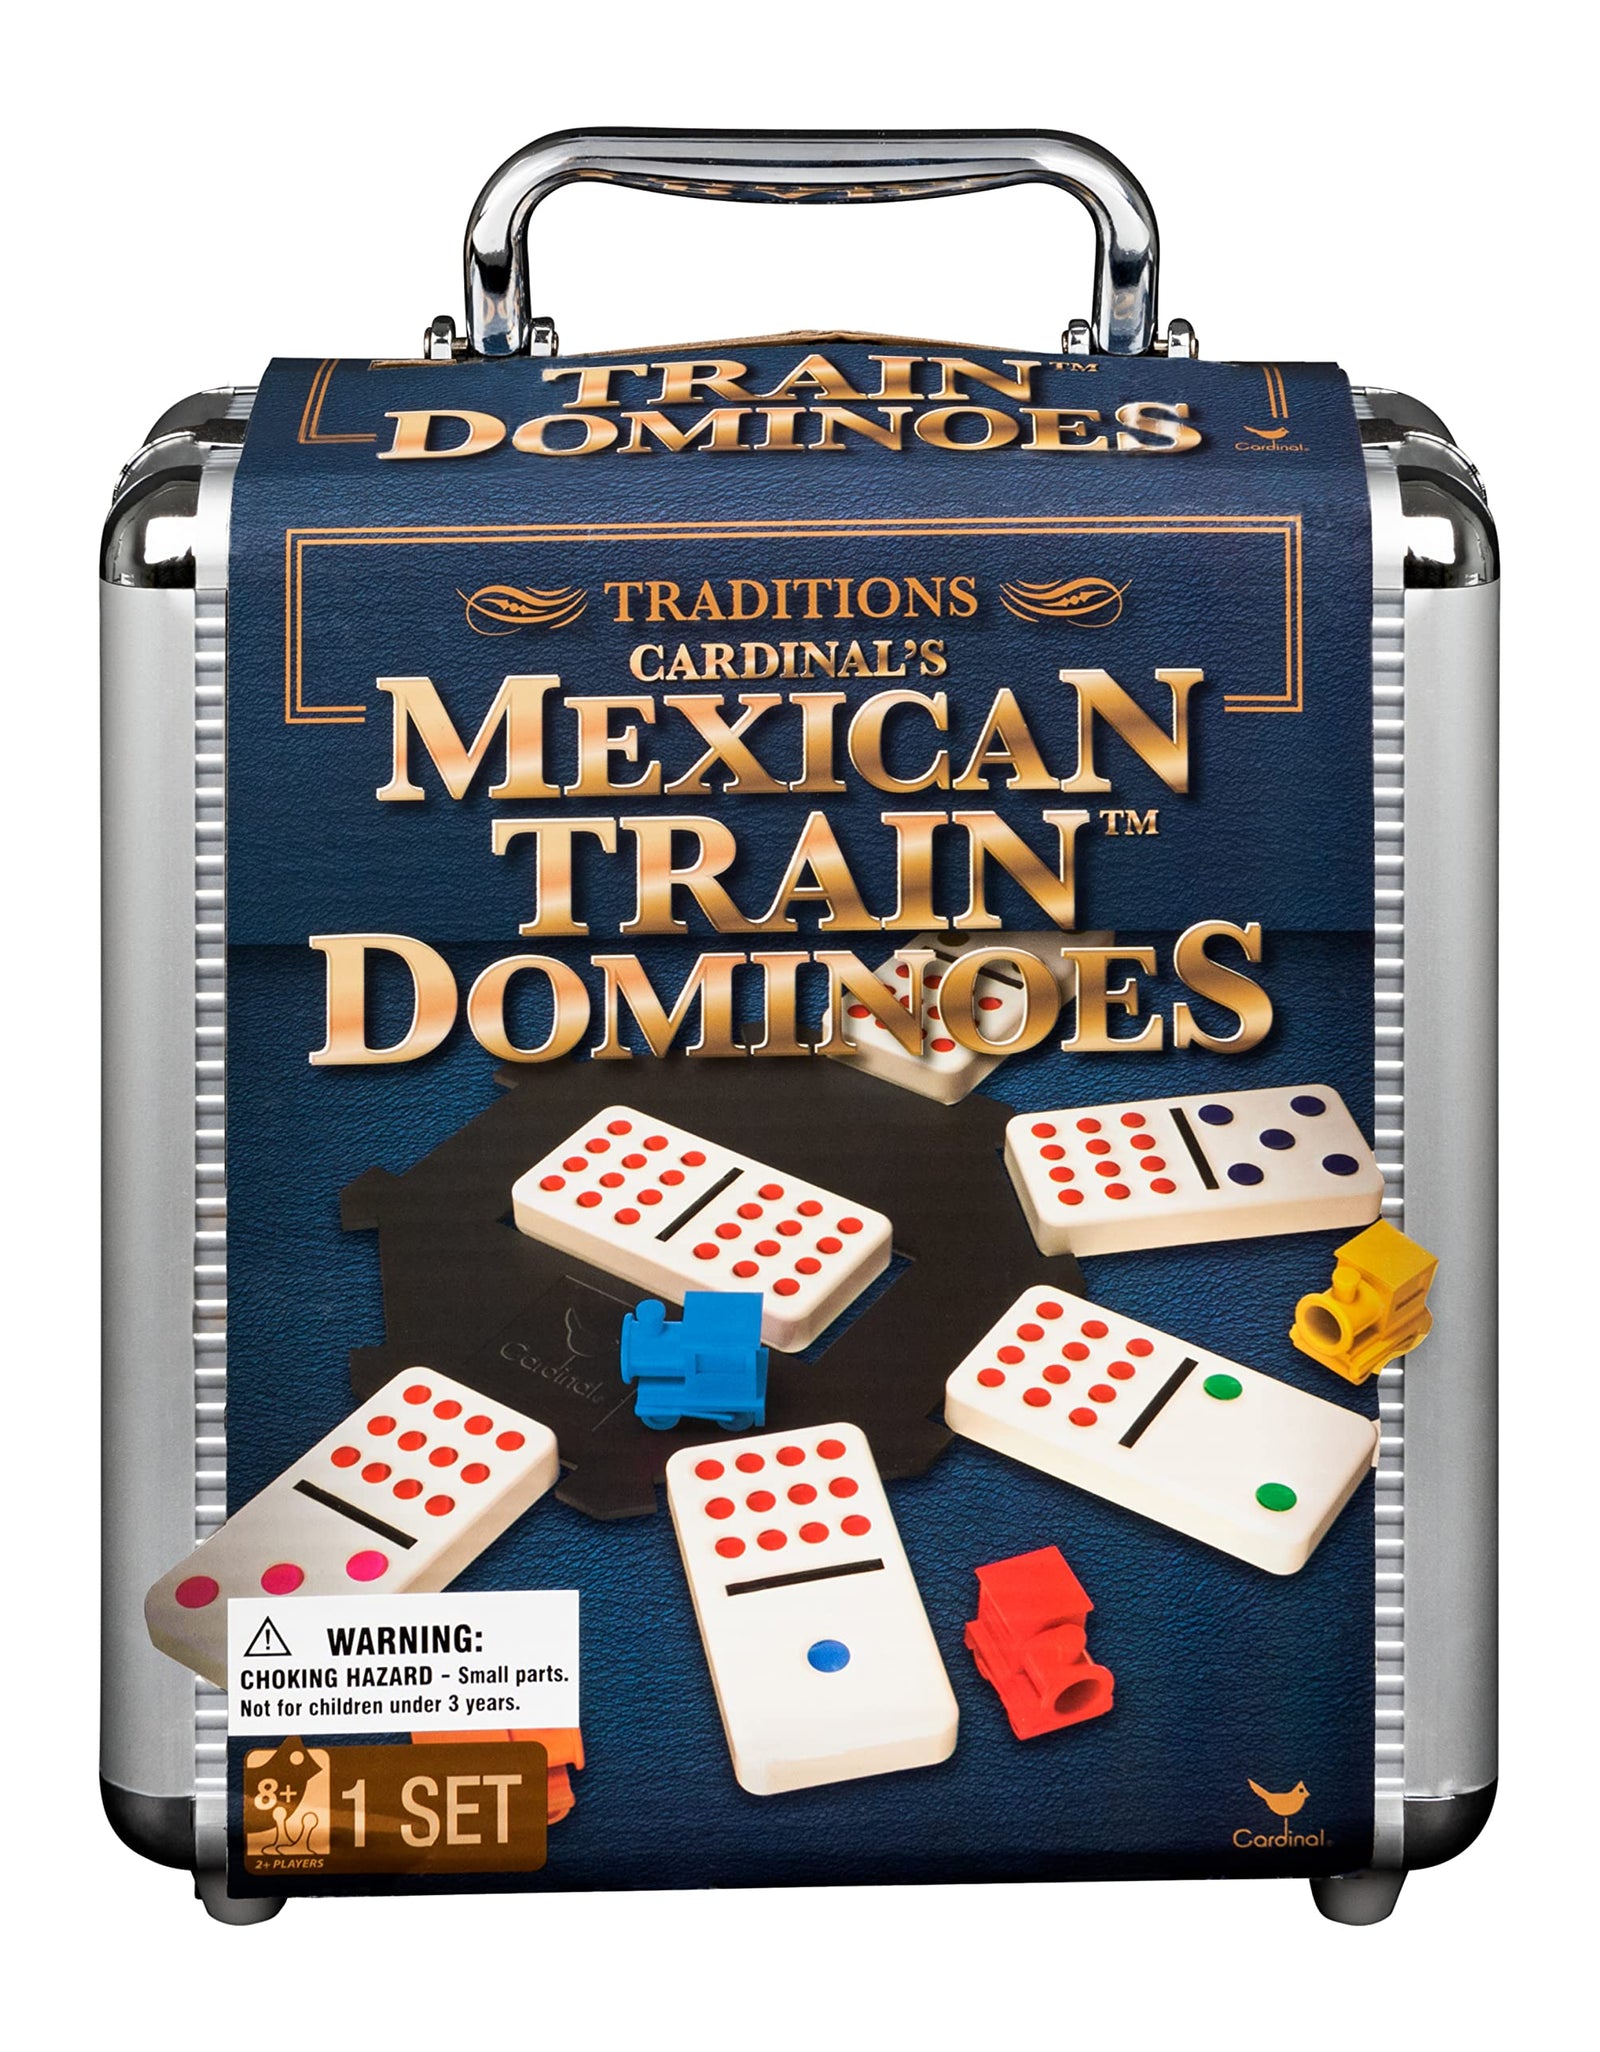 Mexican Train Dominoes Game in Aluminum Carry Case, for Families and Kids Ages 8 and up